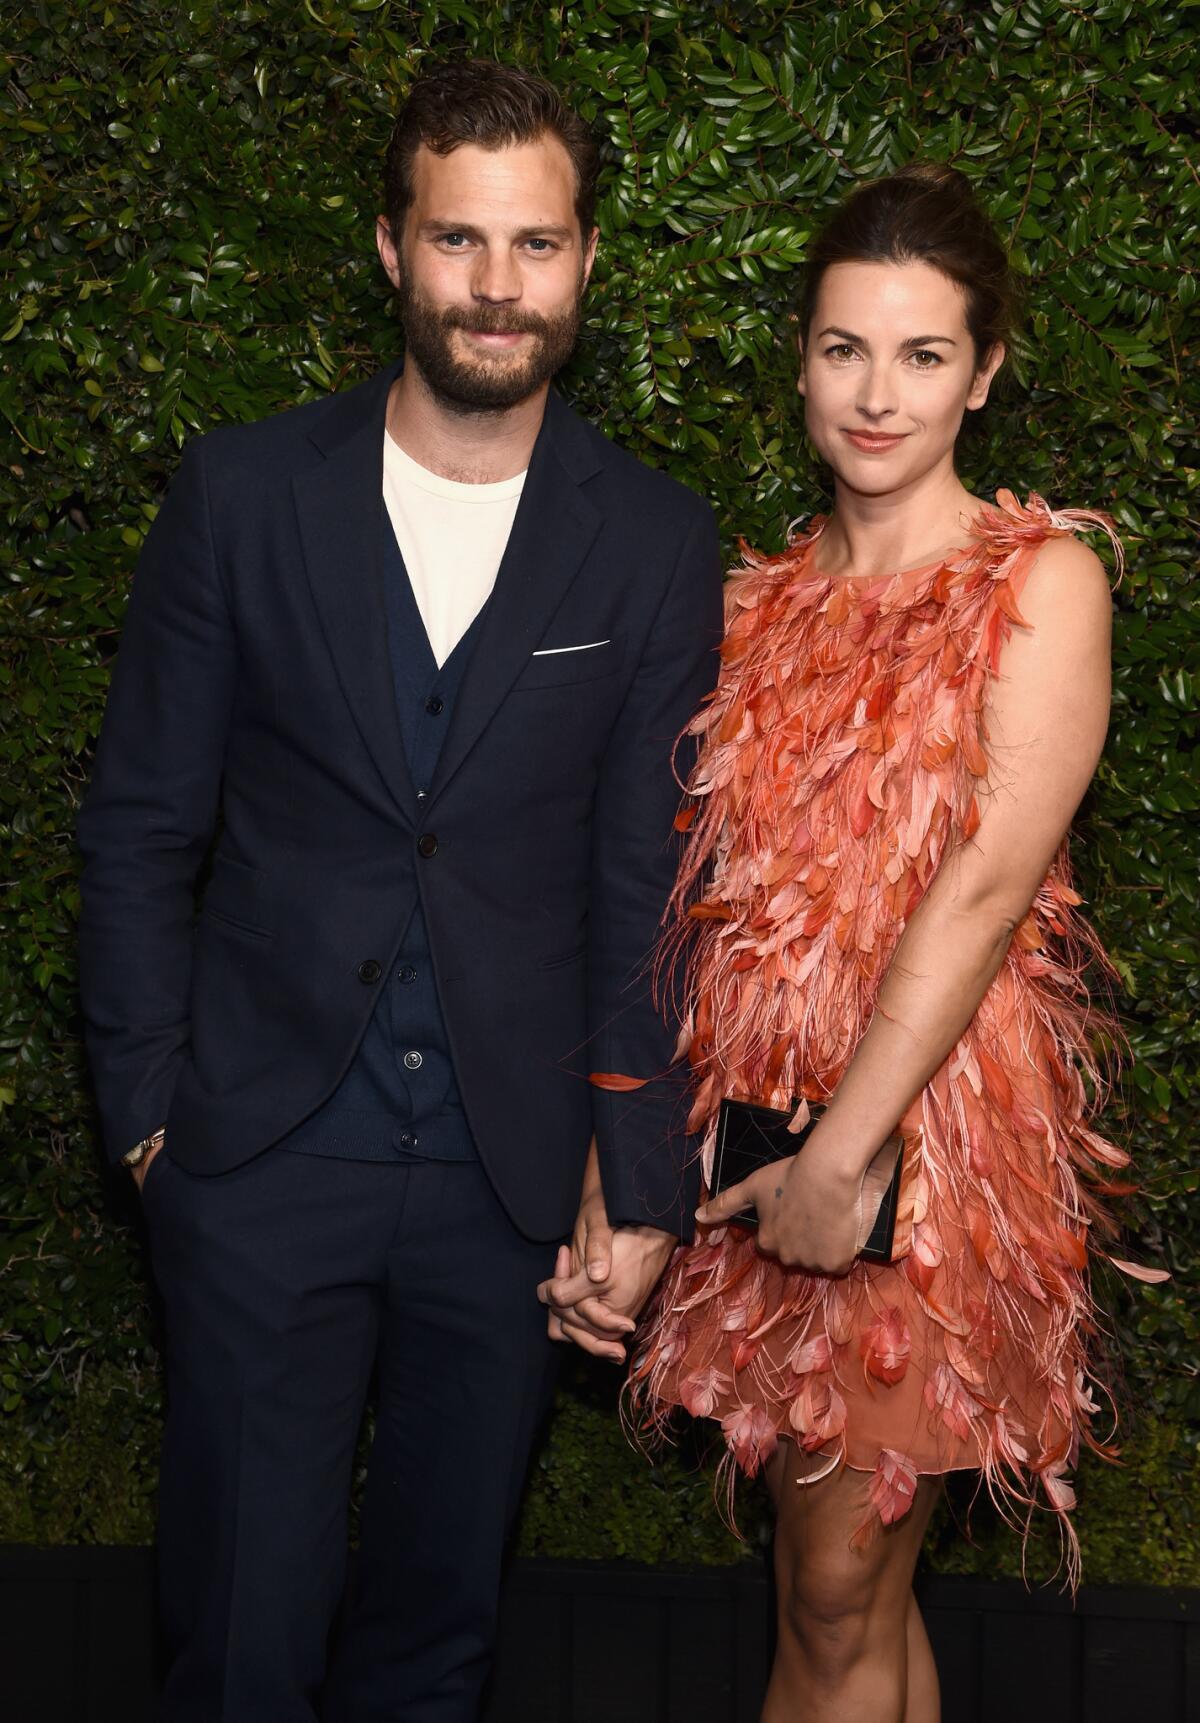 Jamie Dornan, left, and Amelia Warner attend the Charles Finch and Chanel pre-Oscars dinner.